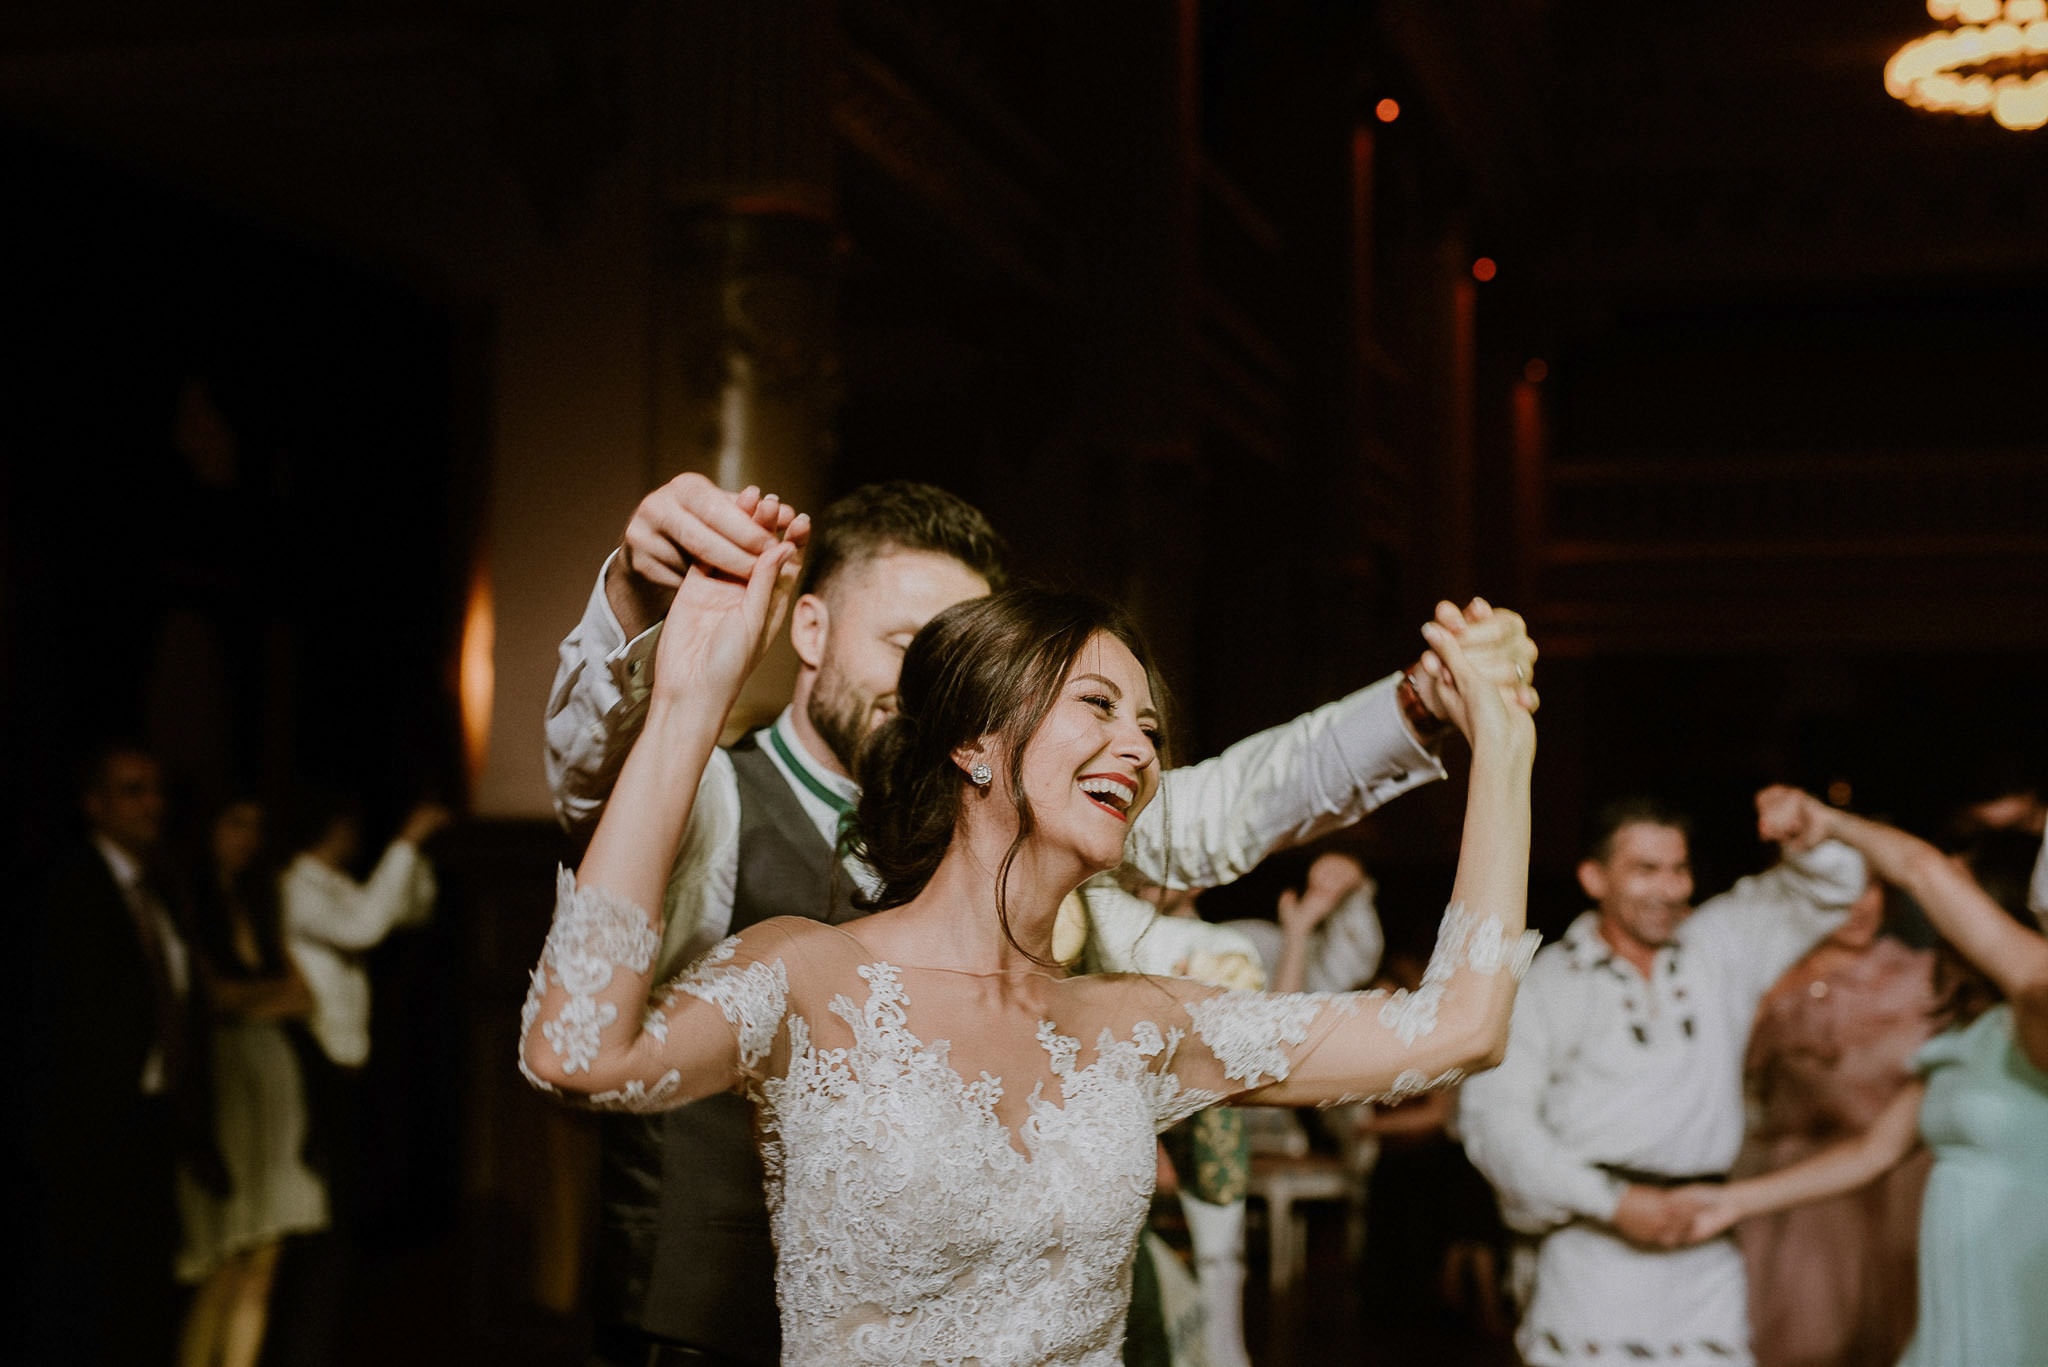 happy bride dancing together with her husband